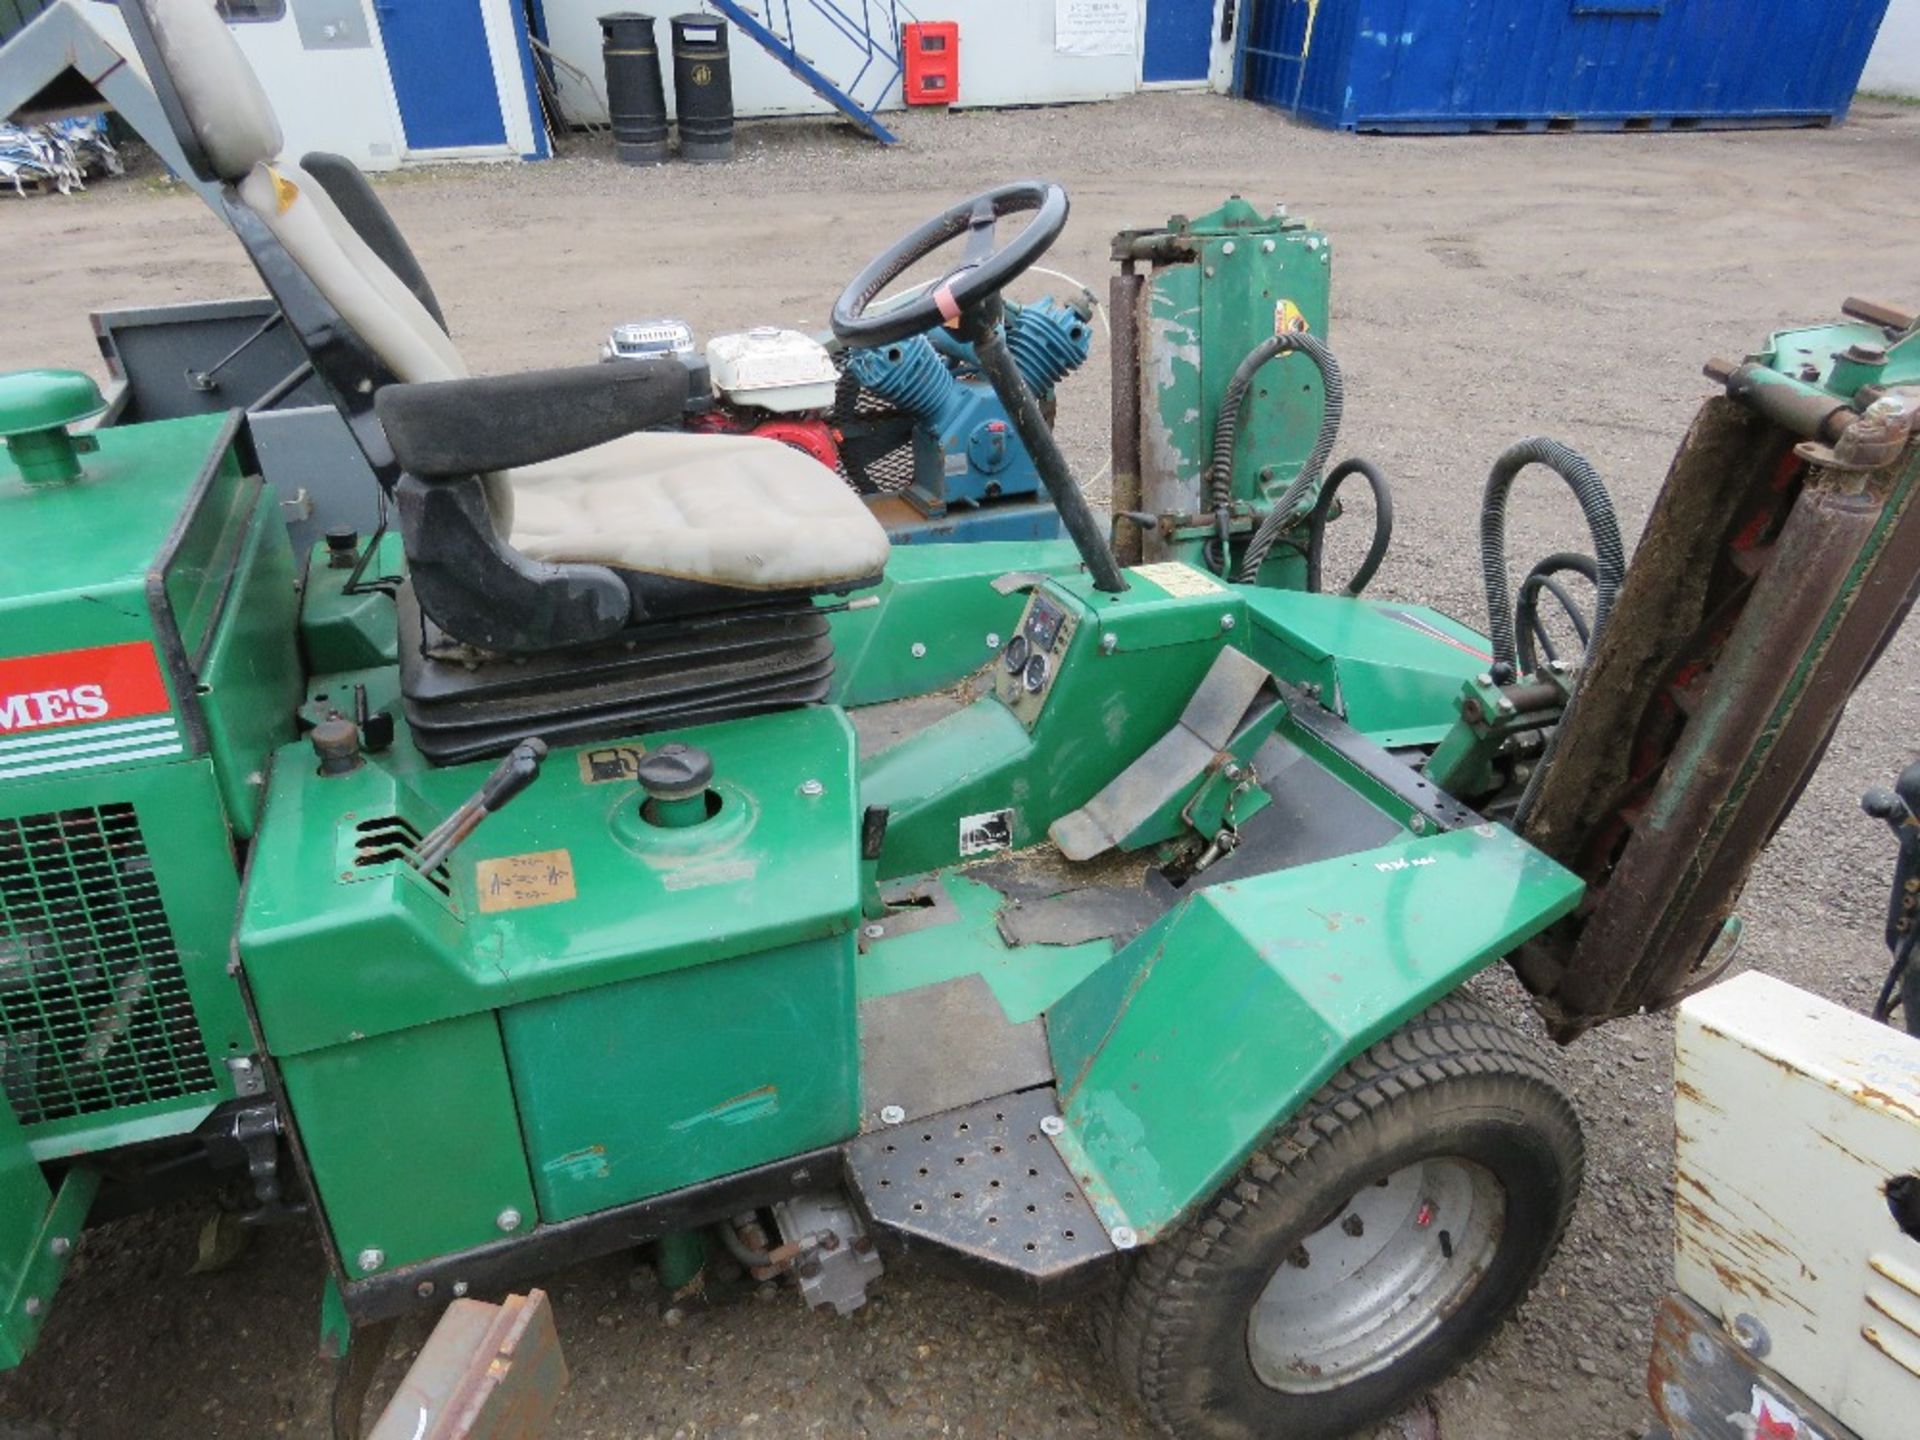 RANSOMES 213 TRIPLE RIDE ON CYLINDER MOWER WITH KUBOTA ENGINE. WHEN TESTED WAS SEEN TO DRIVE, STEER, - Image 8 of 11